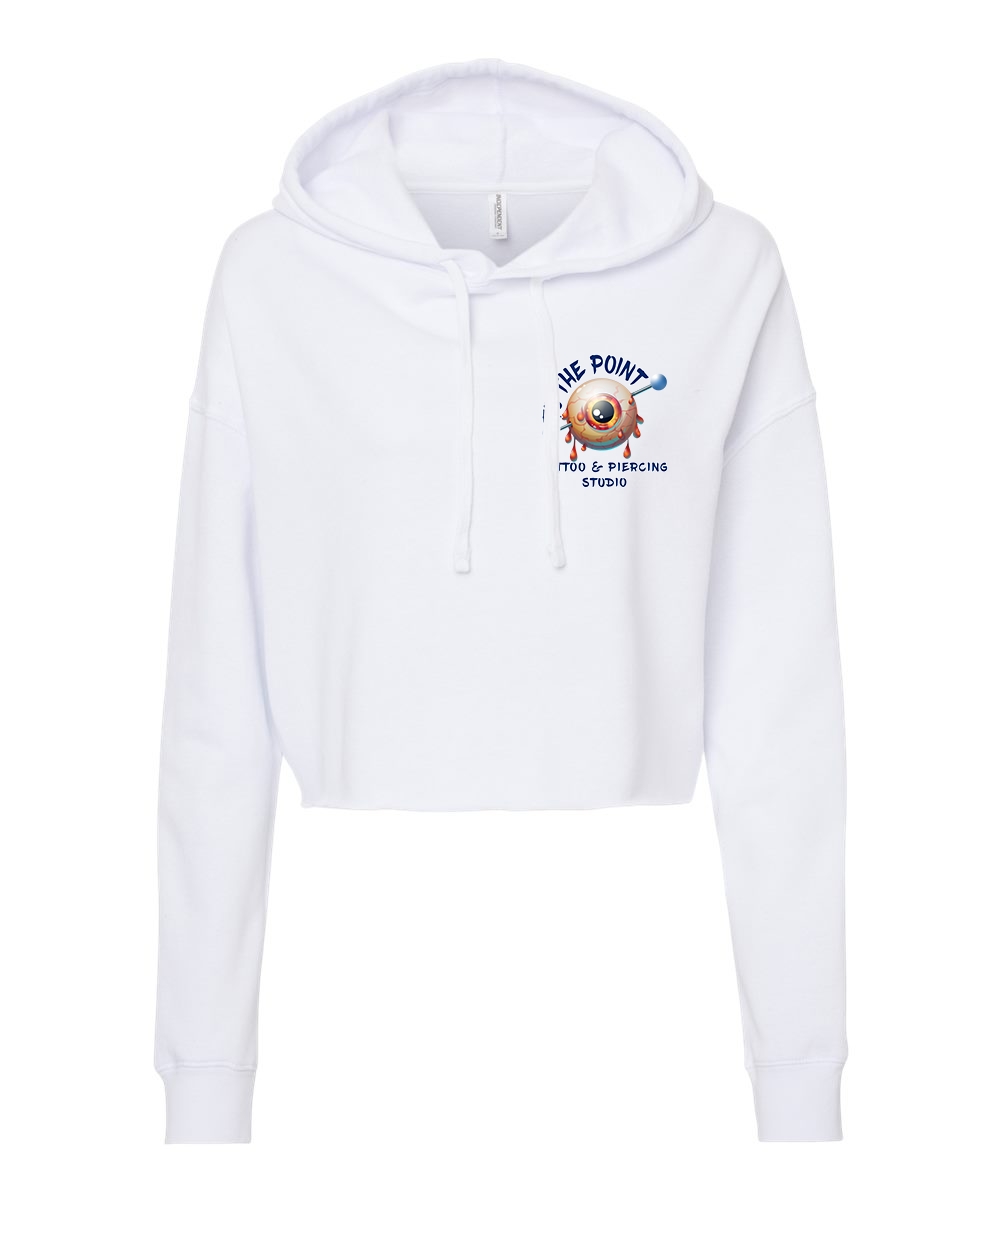 To The Point Piercing Studio Women's Crop Hoodie Style1 - White